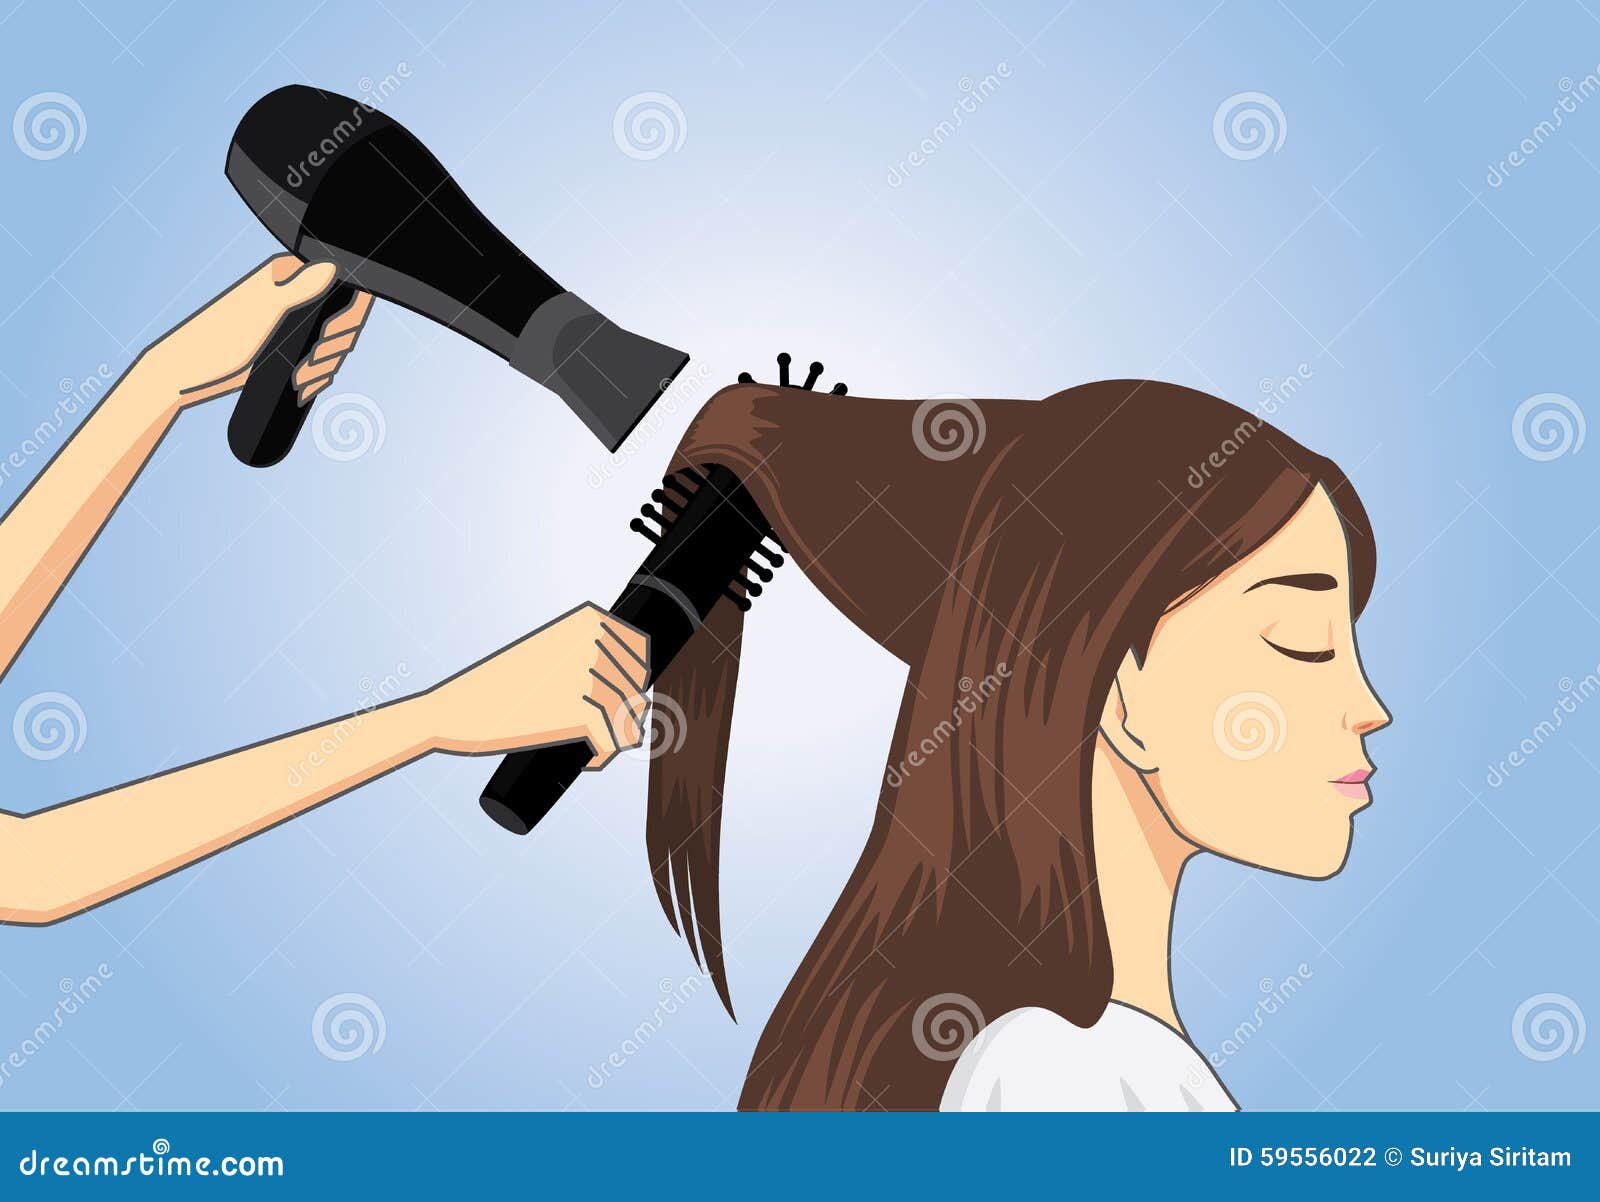 Customer To Get A Salon Blow Dry Stock Vector - Image: 59556022